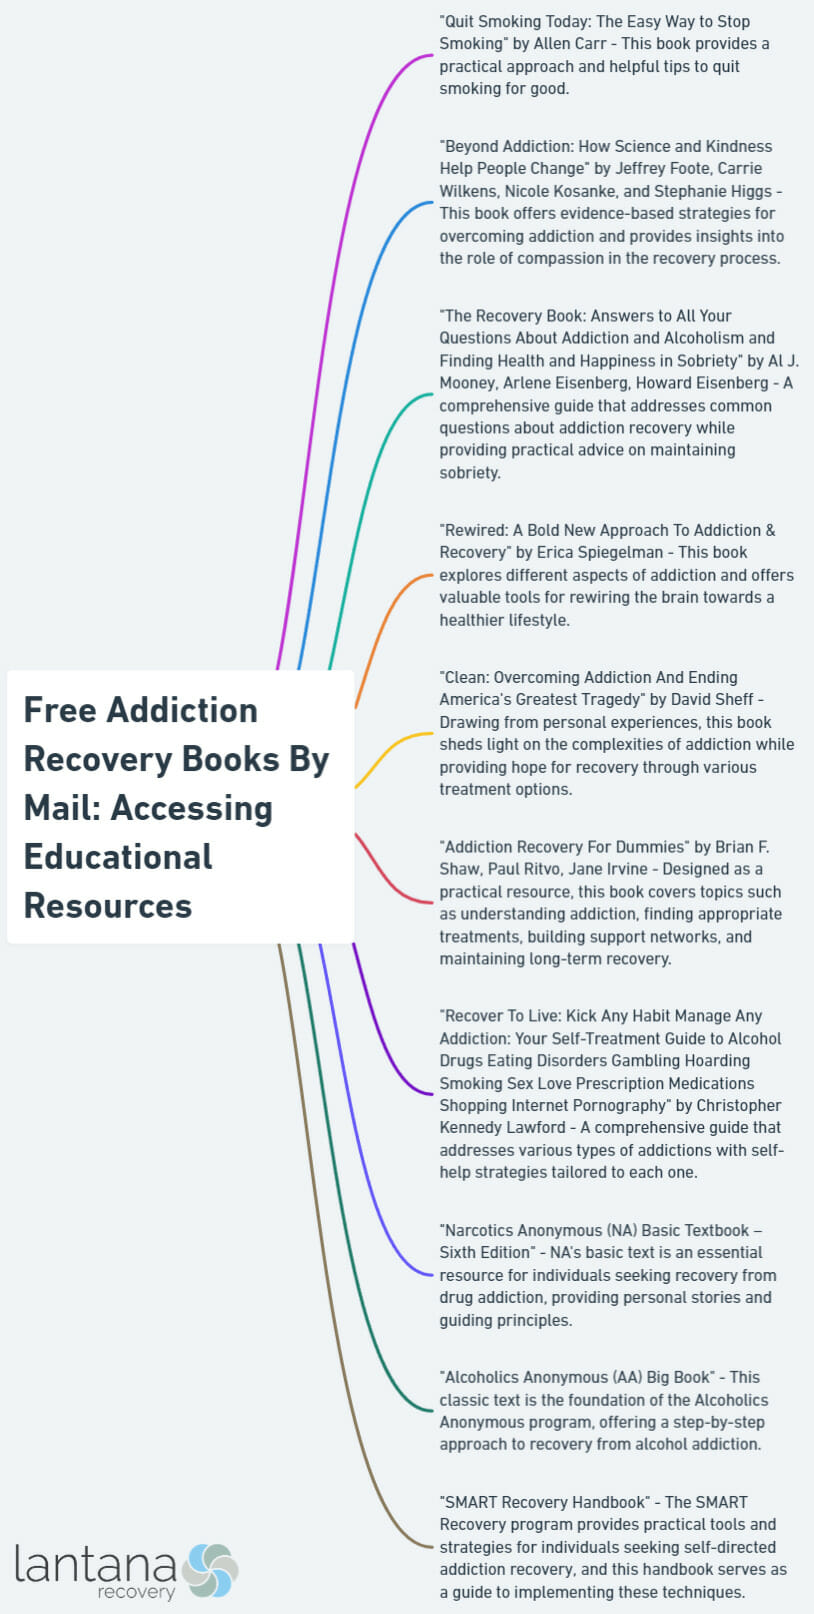 Free Addiction Recovery Books By Mail: Accessing Educational Resources
